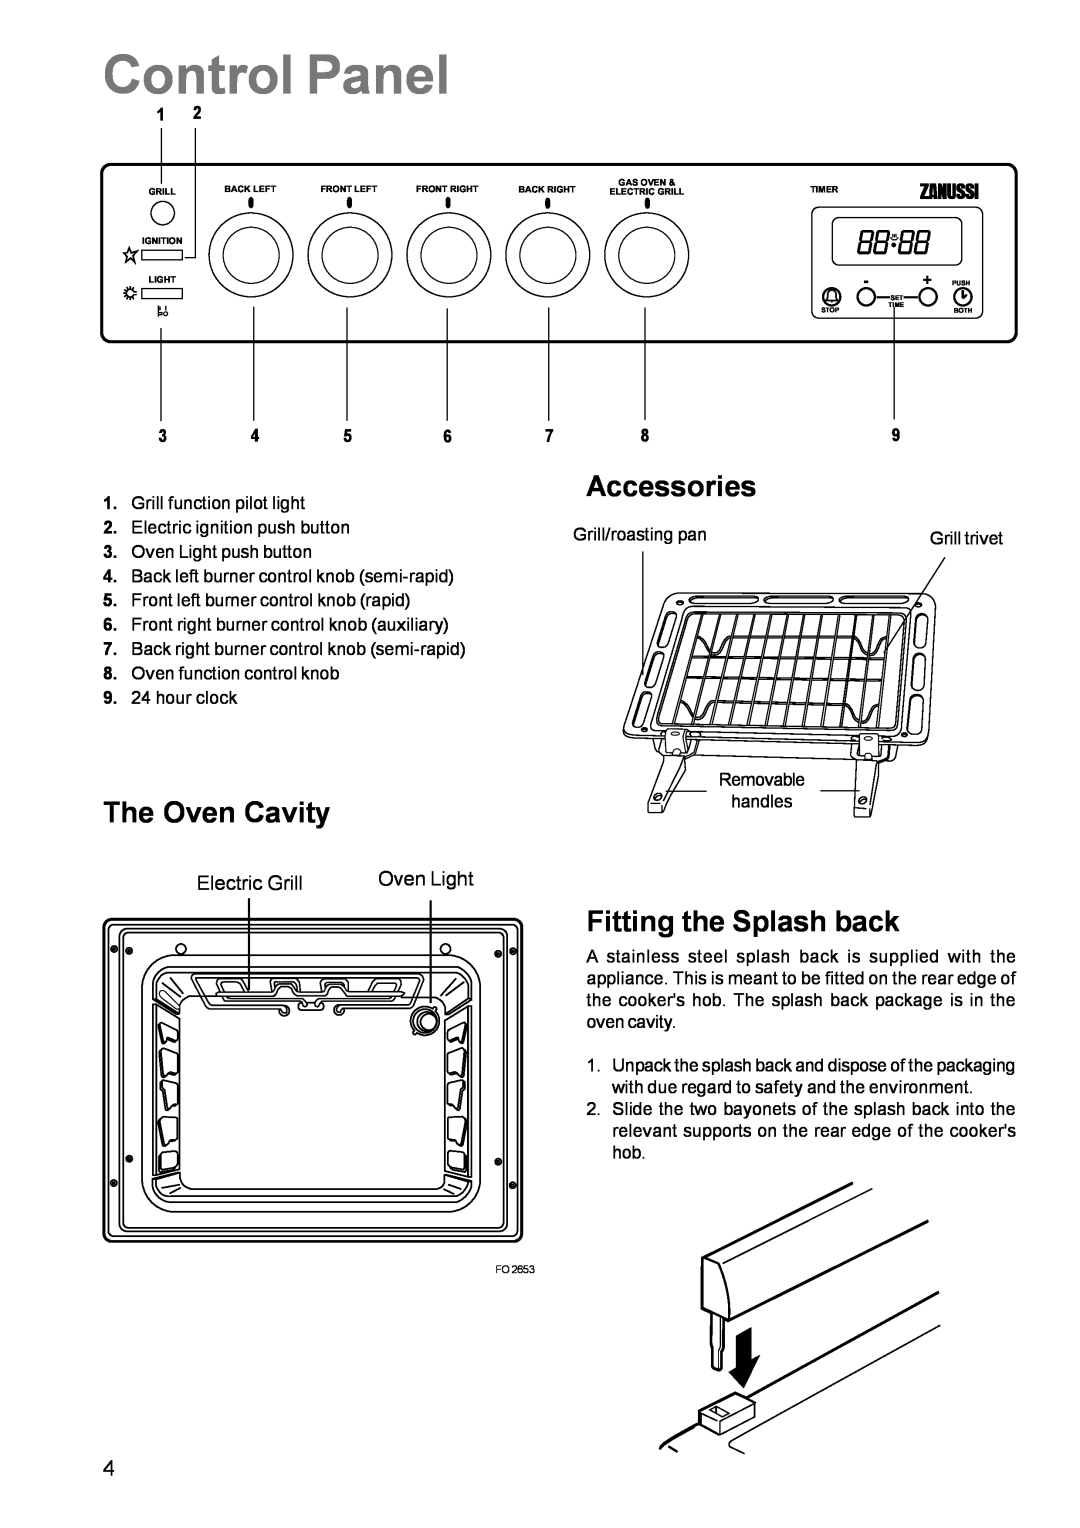 Zanussi ZCG 611 manual Control Panel, Accessories, The Oven Cavity, Fitting the Splash back 